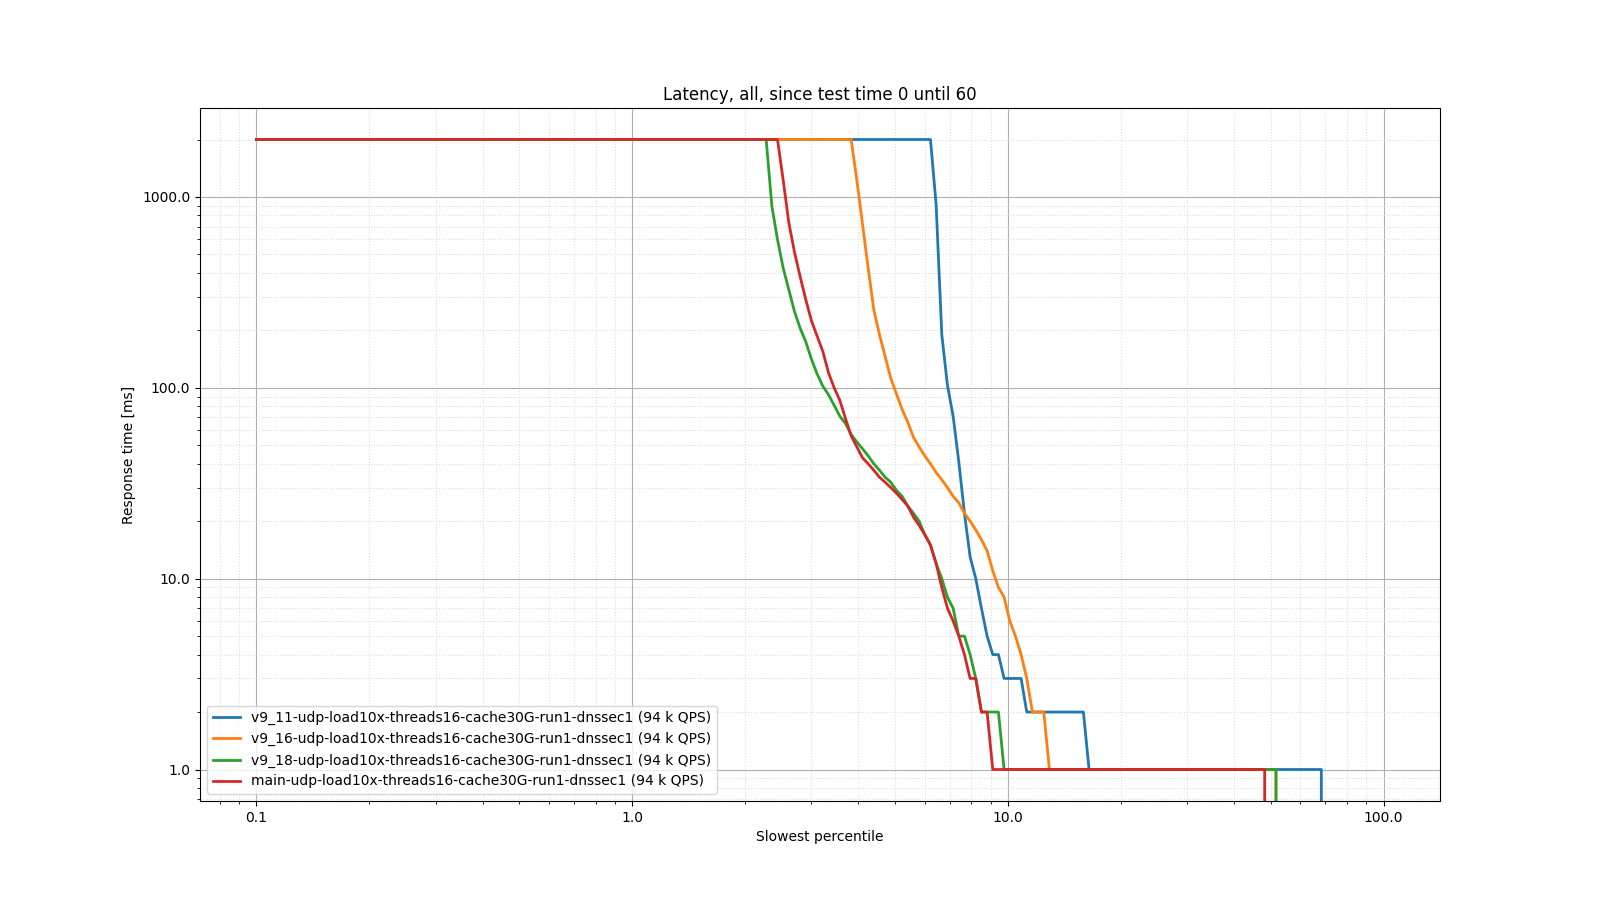 Resolver query response time shown in a logarithmic percentile histogram, comparing recent versions of BIND 9.11, 9.16, 9.18 and 9.19 performance during the first 60 seconds of operation (cold cache).